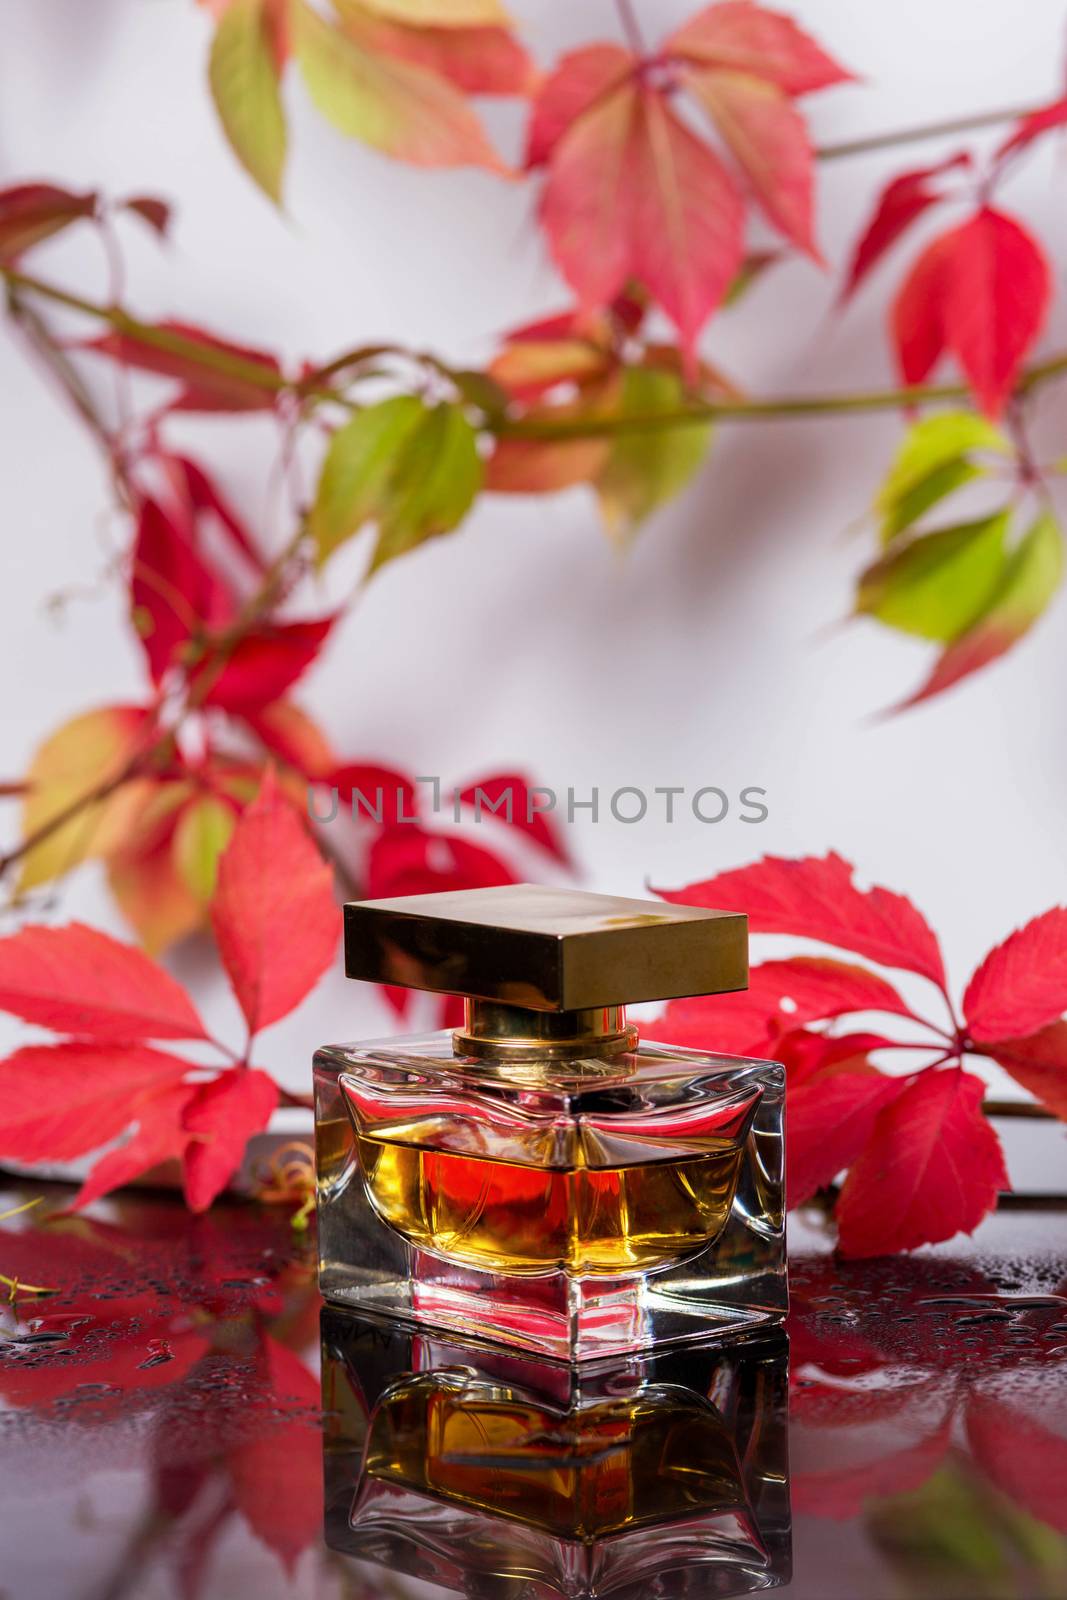 Perfume bottle and vintage fragrance on a black glass surface surrounded by autumn leaves of wild grapes and water drops, aroma scent, fragrant cosmetics and eau de toilette as luxury beauty brand